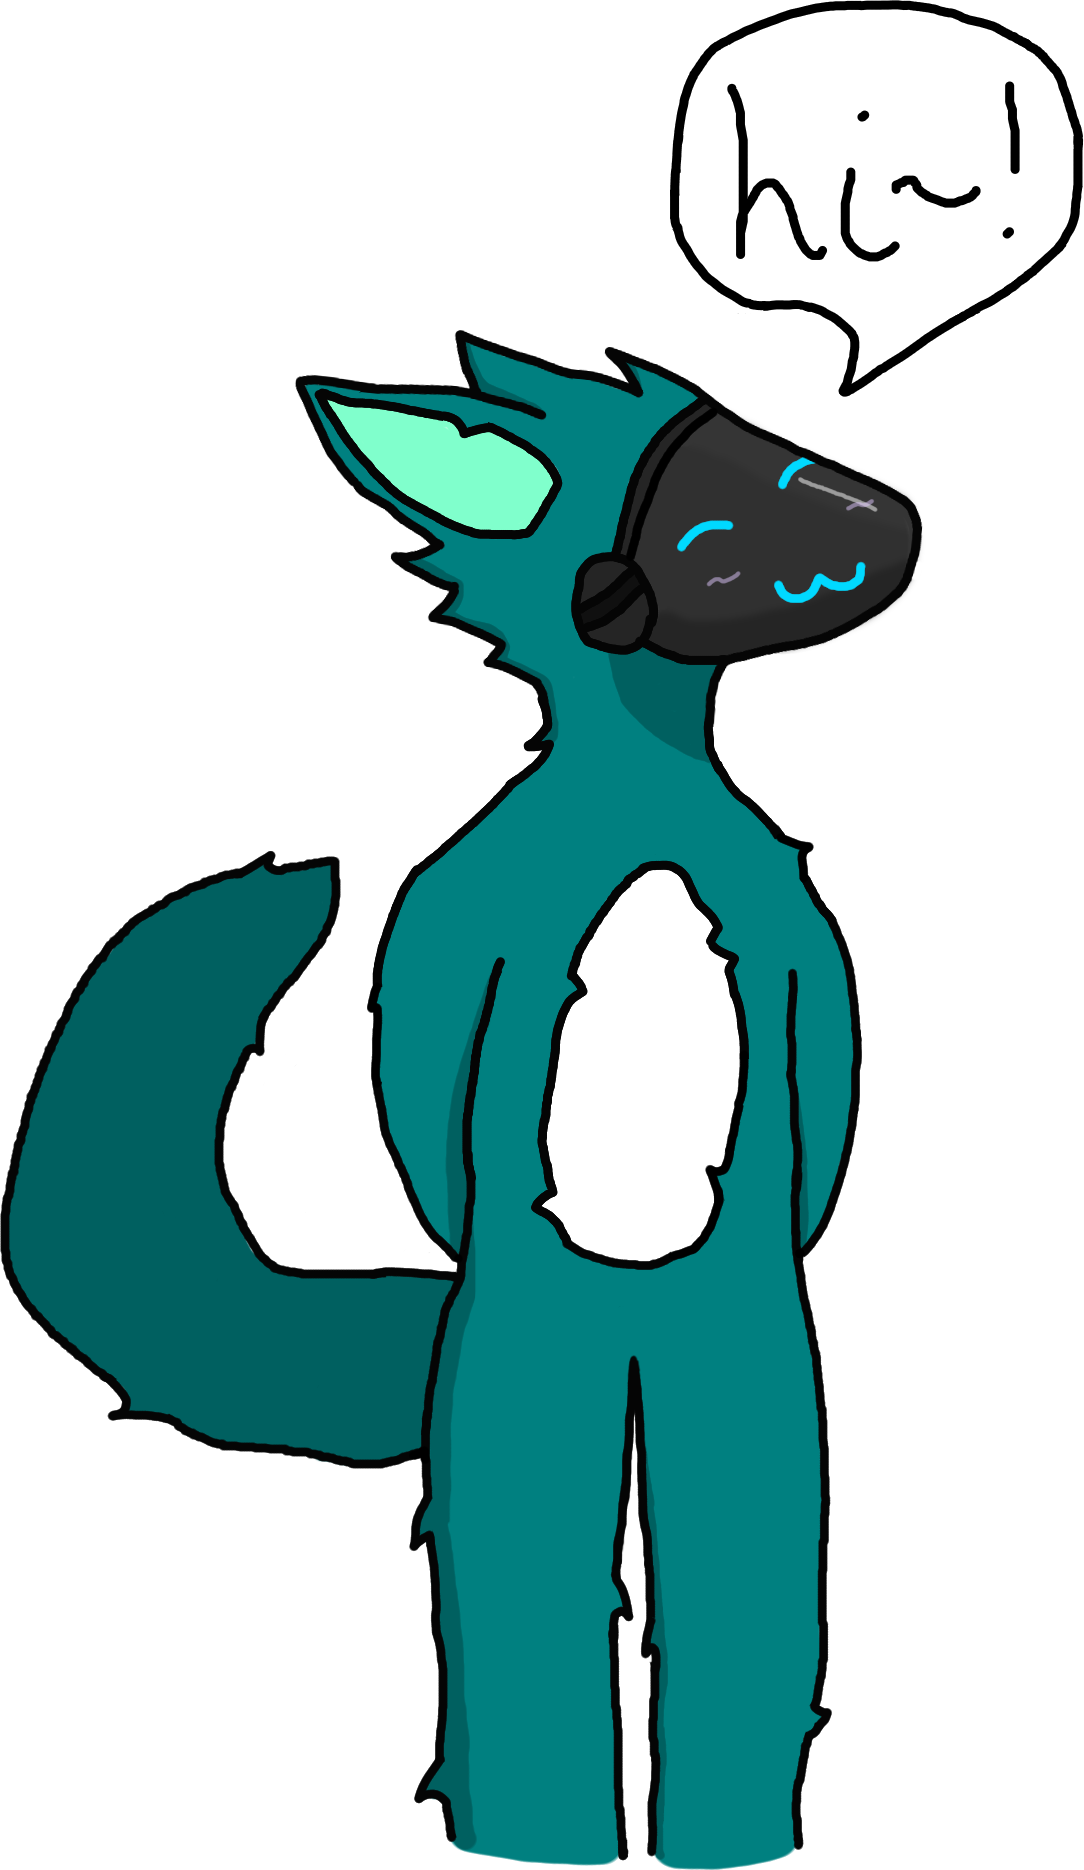 a drawing of my fursona, tauon. she is green, with white tummy fur, has a big fluffy tail, big ears, and a black visor with a blue lit up face. a speech bubble is above her that says 'hi~!'